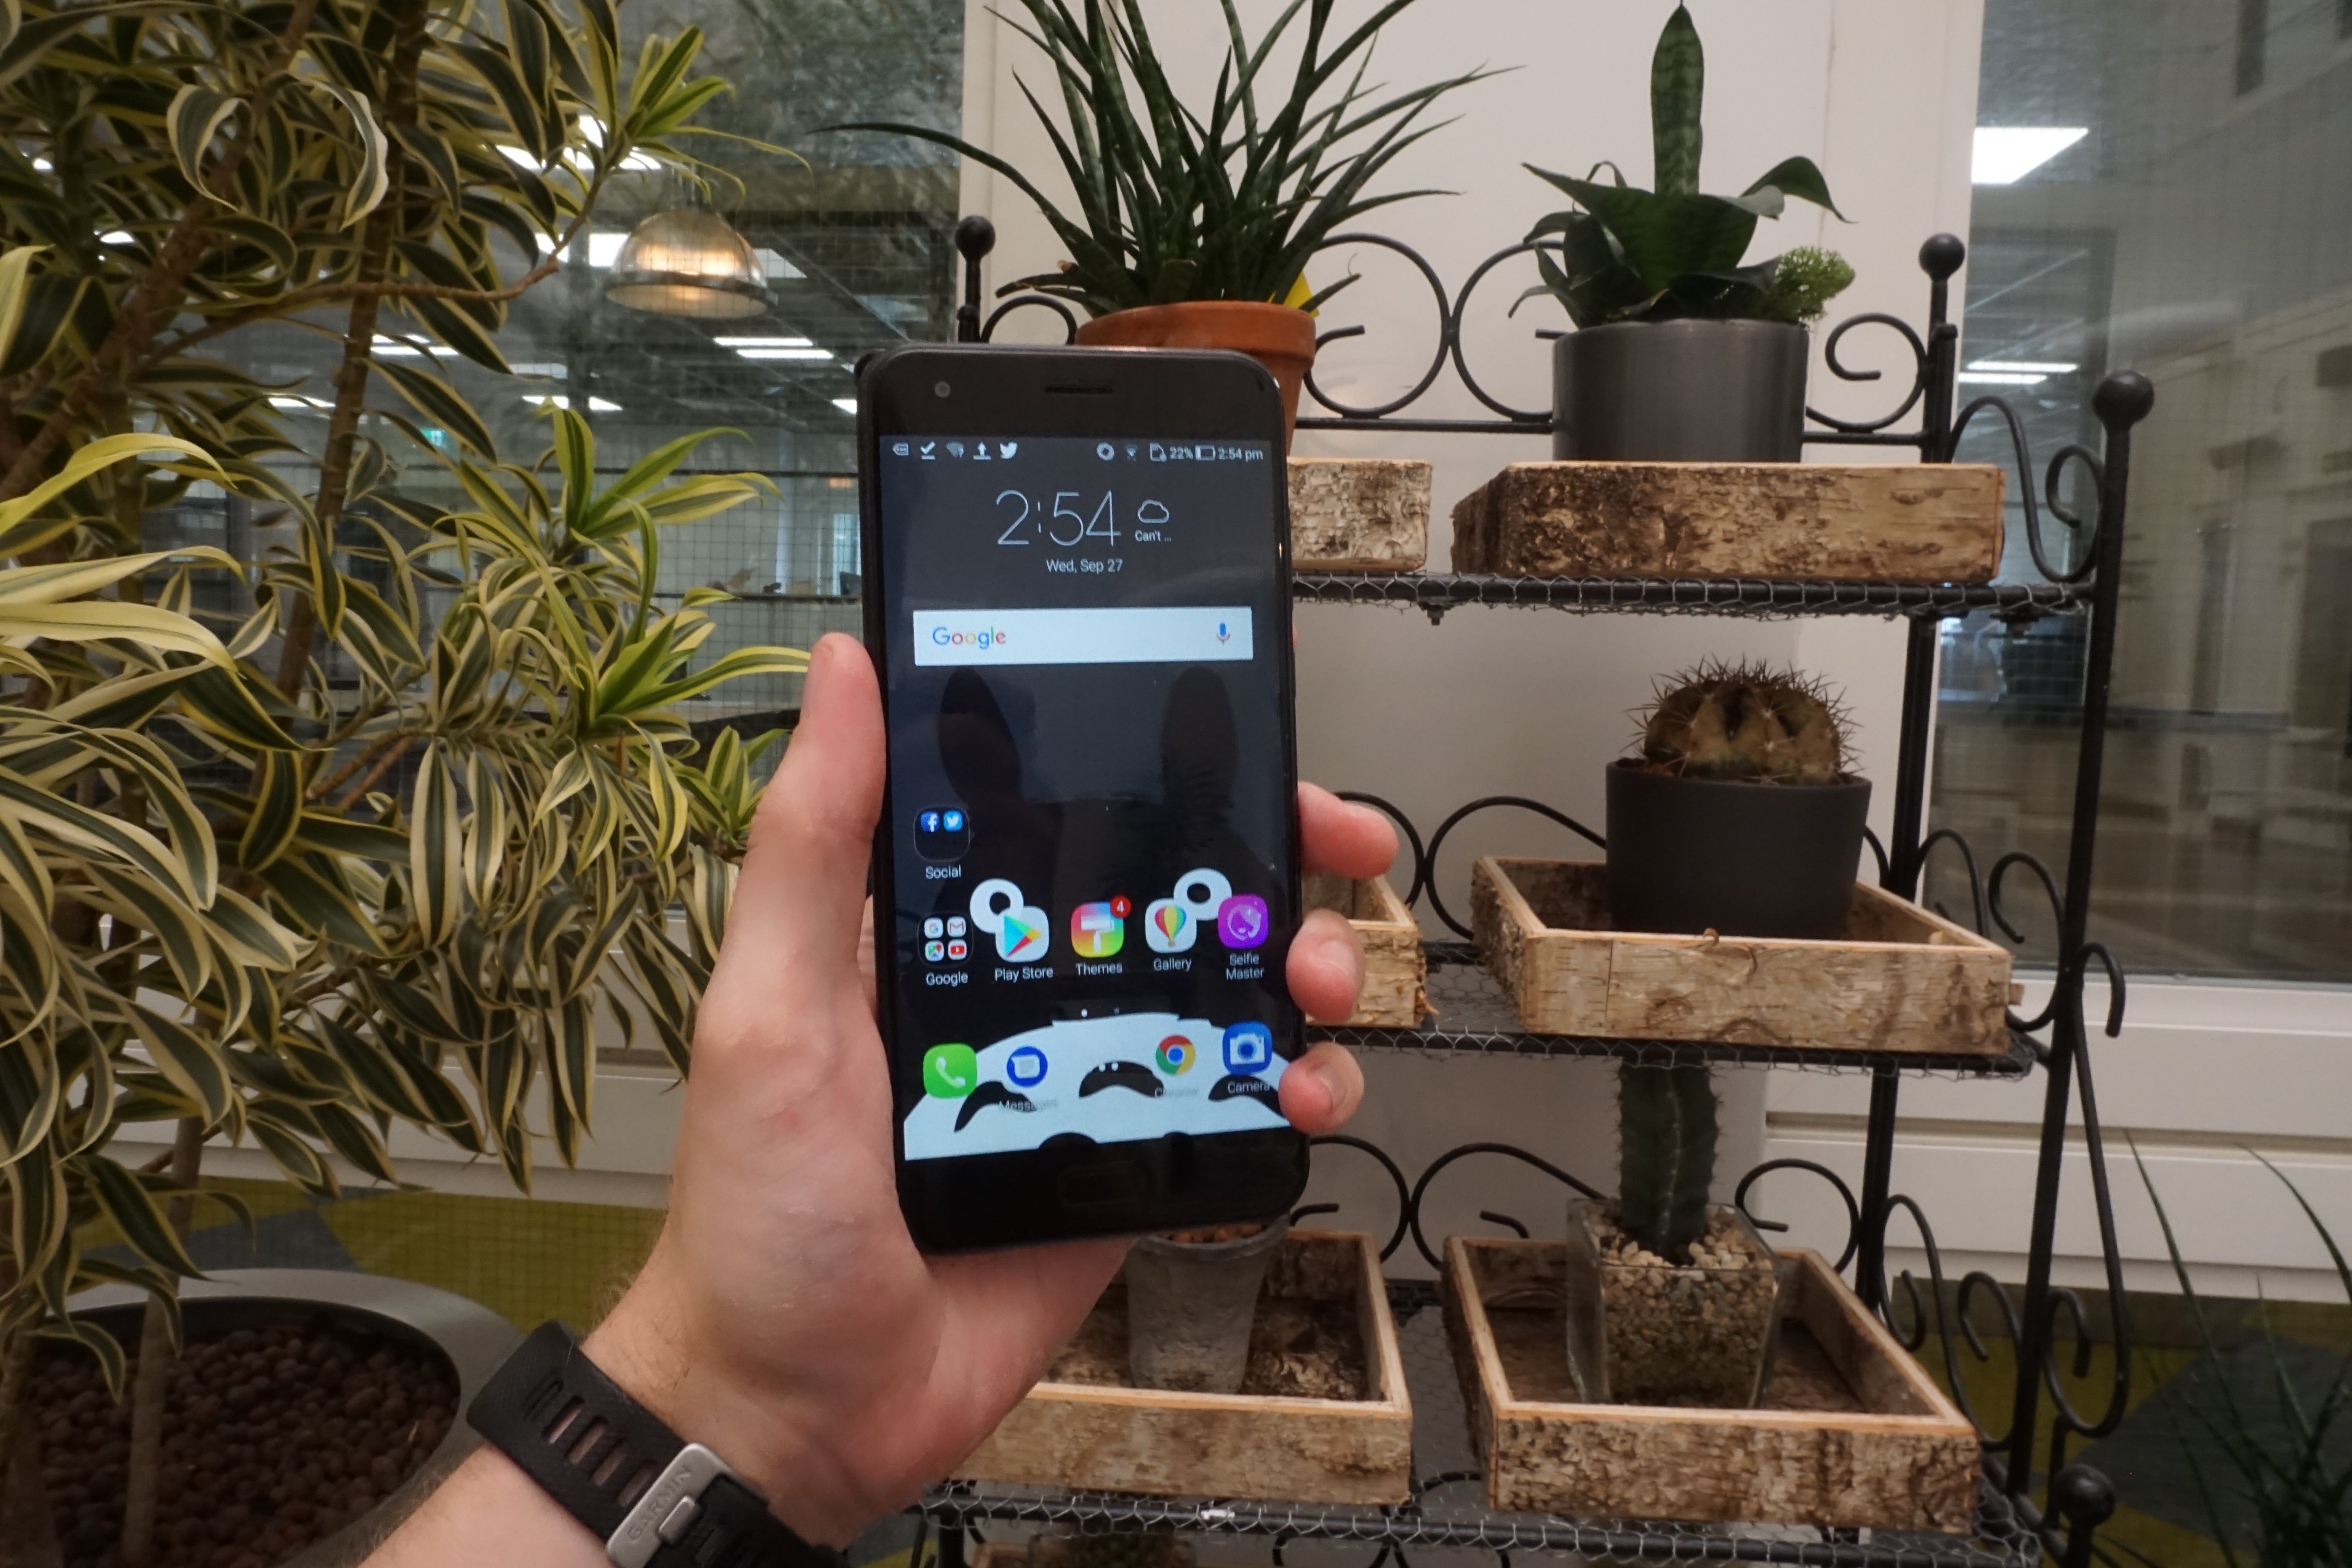 Hand holding an Asus Zenfone 4 in an office with plants